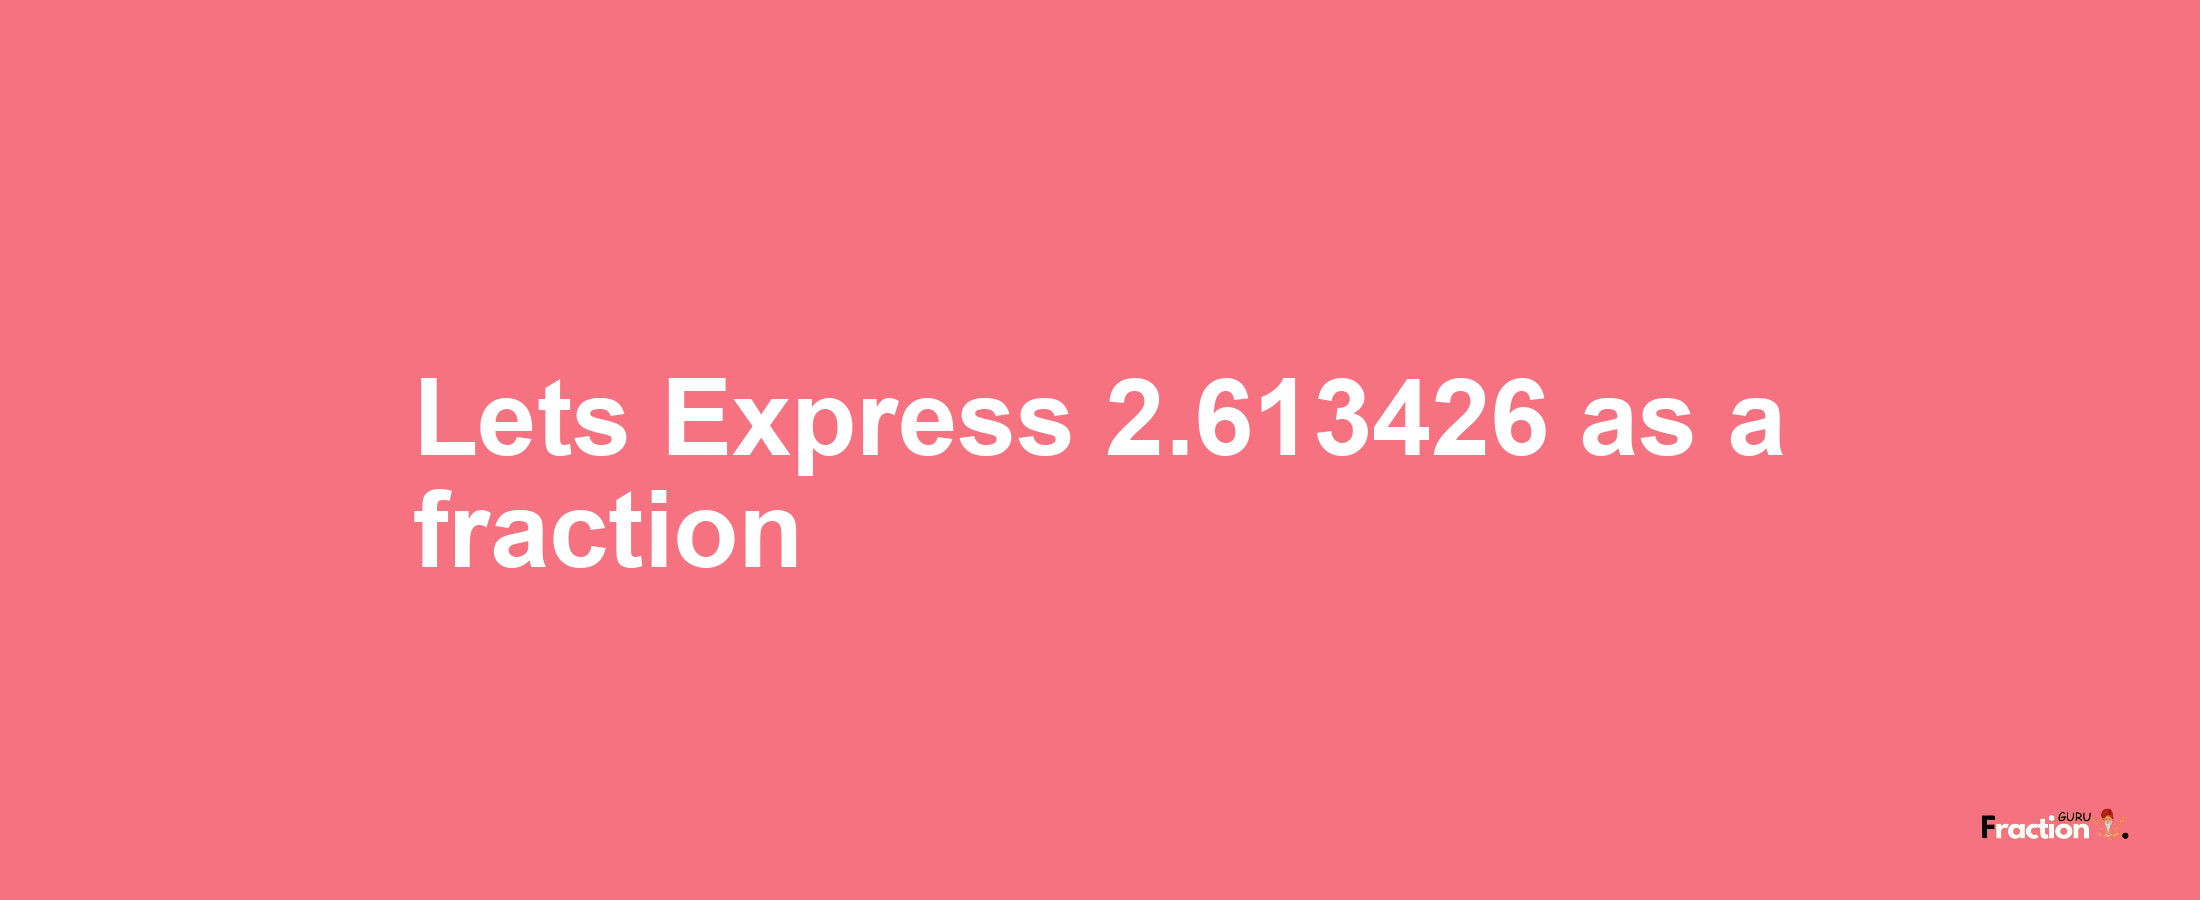 Lets Express 2.613426 as afraction